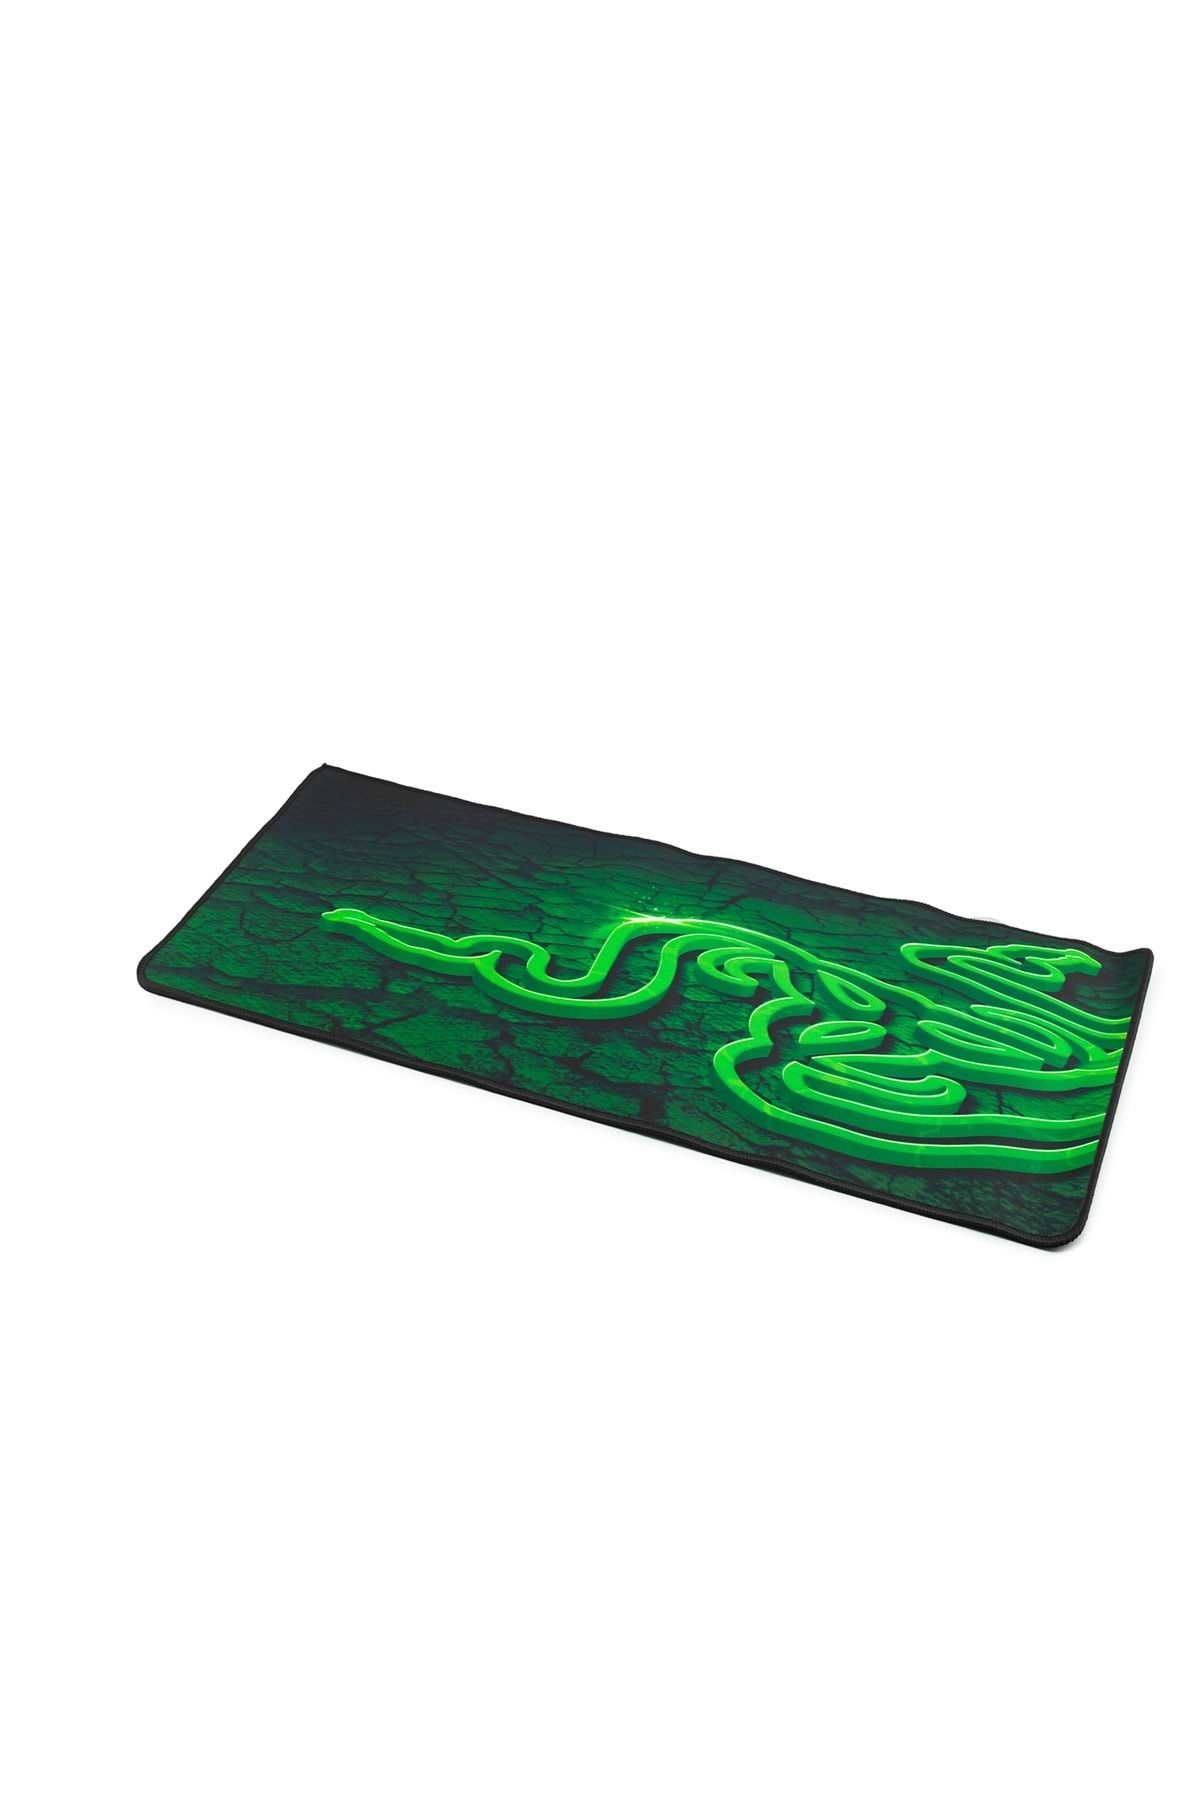 HADRON Hdx3510 Oyun Mouse Pad 300*700*3mm